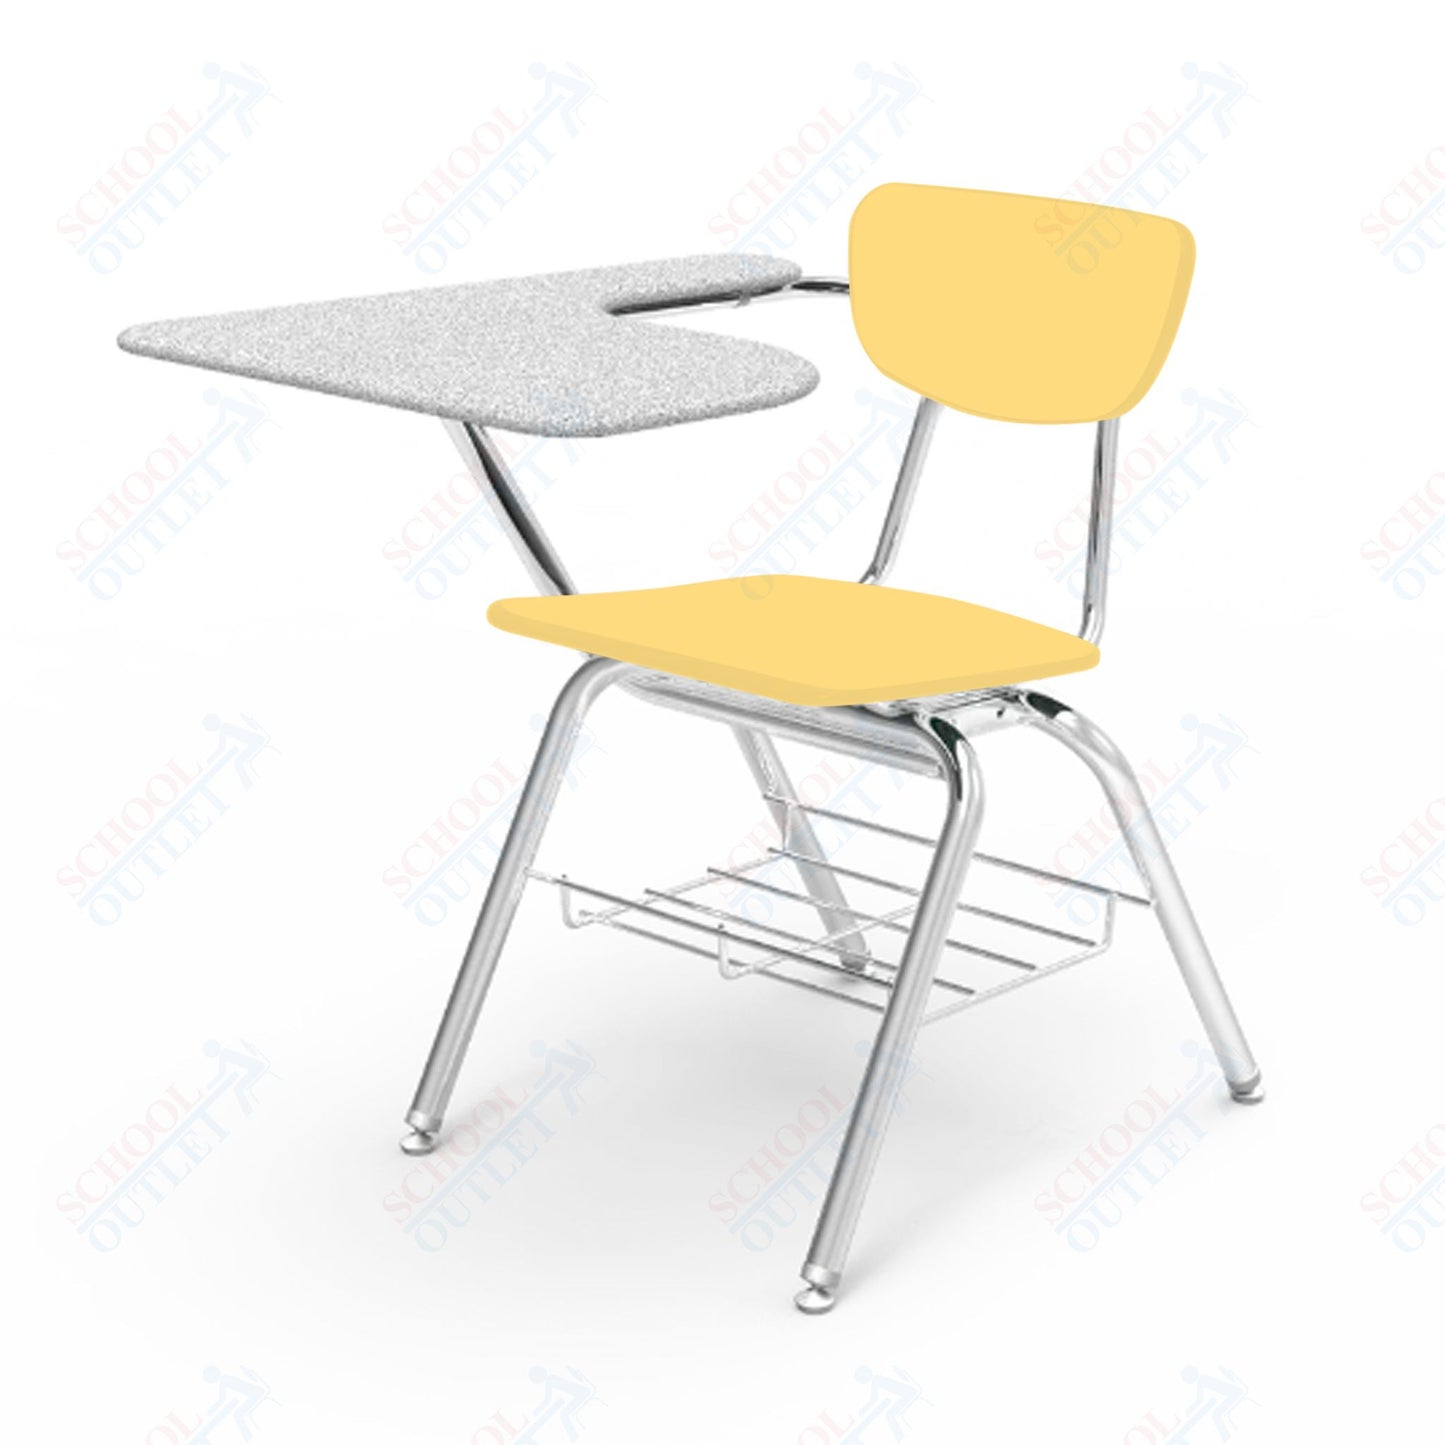 Virco 3700BRL Student Tablet Arm Chair Desk with 18" Hard Plastic Seat, Laminate Top and Bookrack for Schools and Classrooms